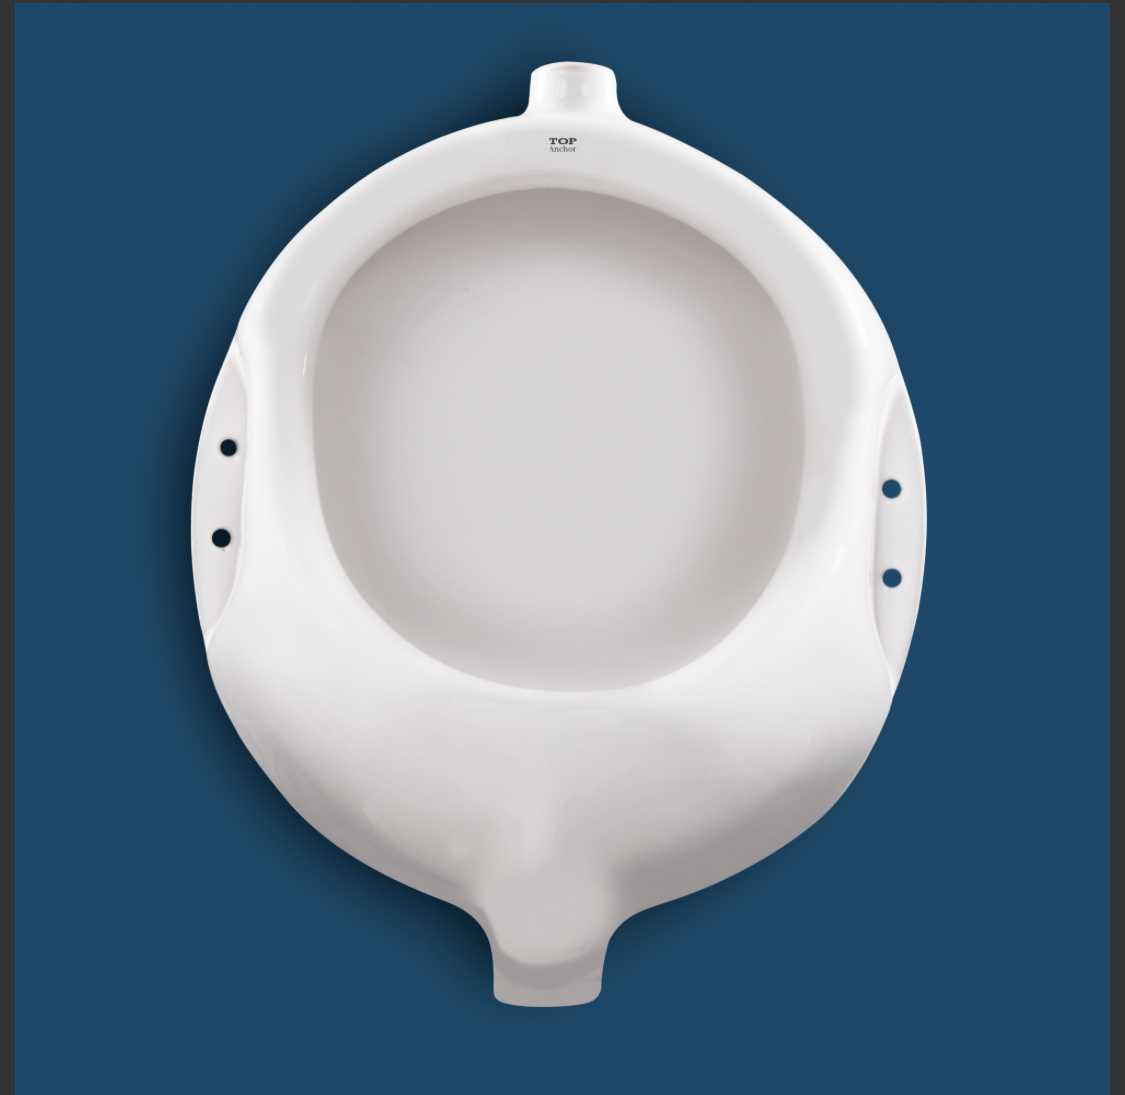 Small size urinal bowl